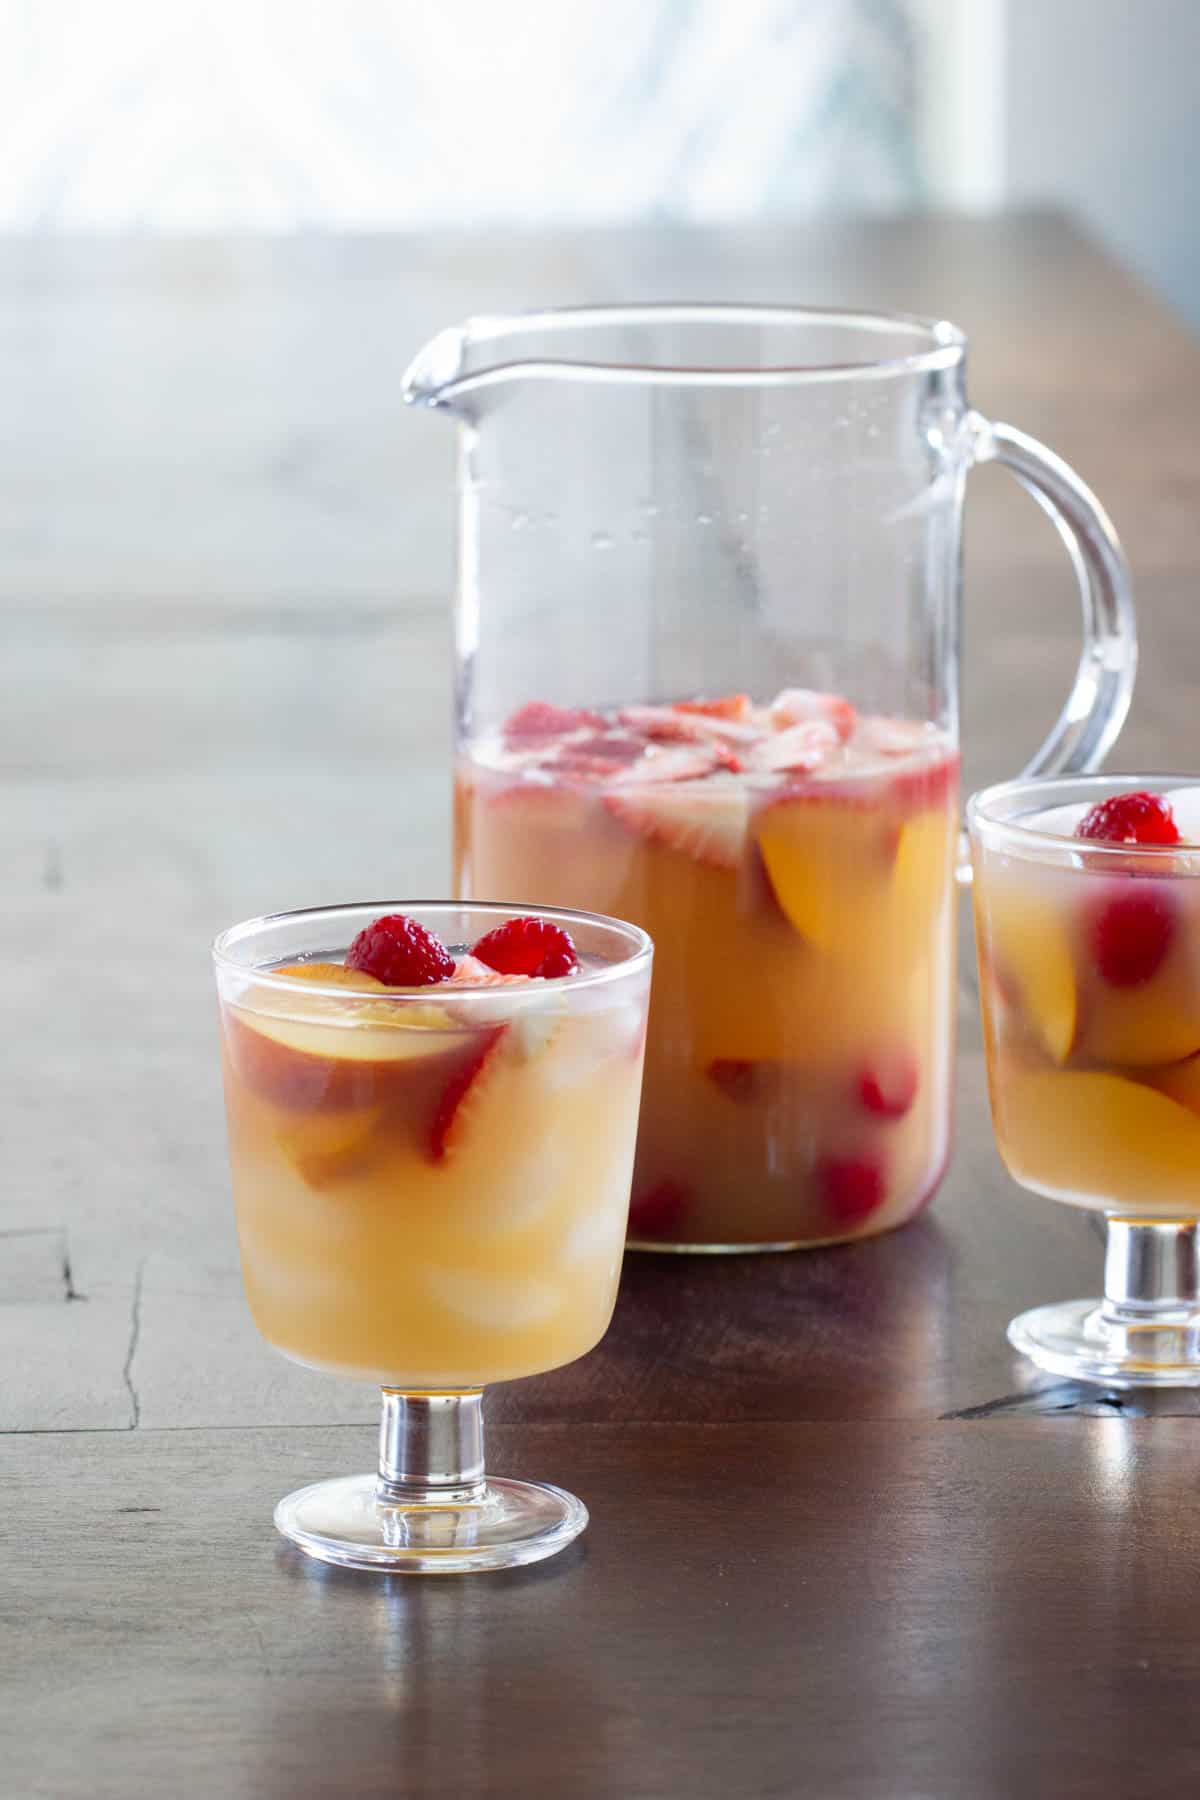 A pitcher and two glasses filled with fruit-infused sangria on a wooden table.